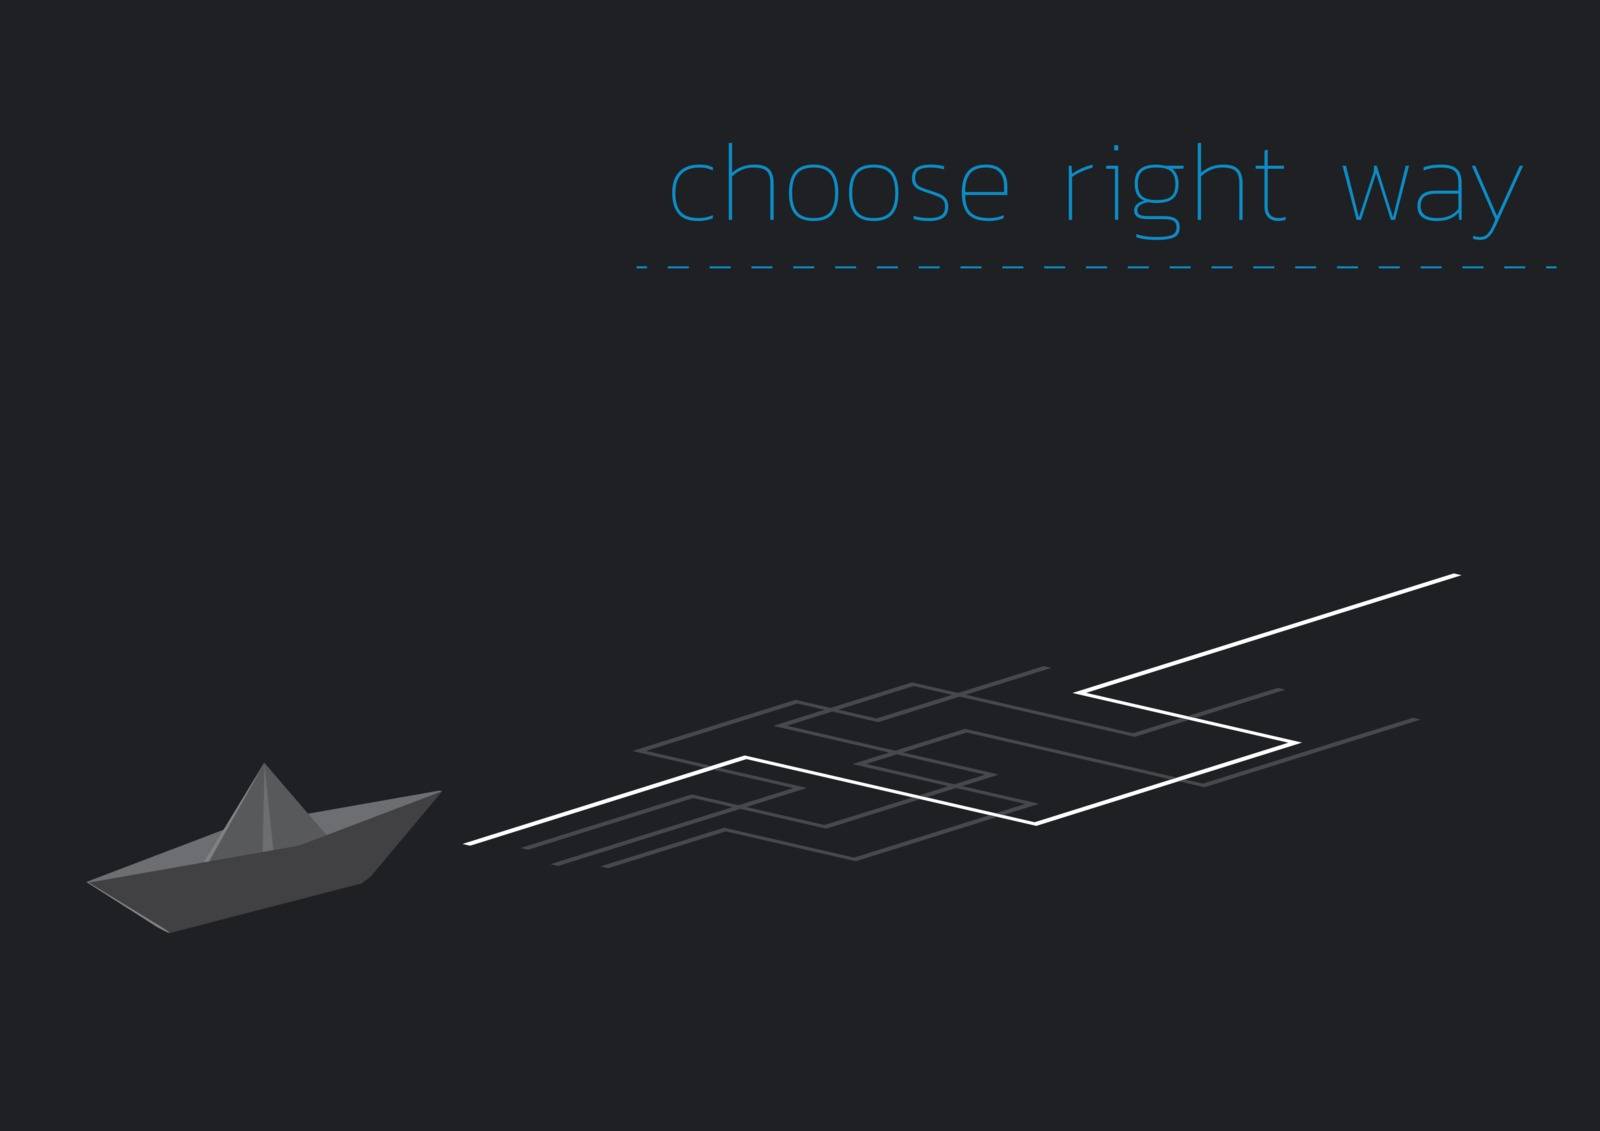 paper ship and choose right way by muuraa